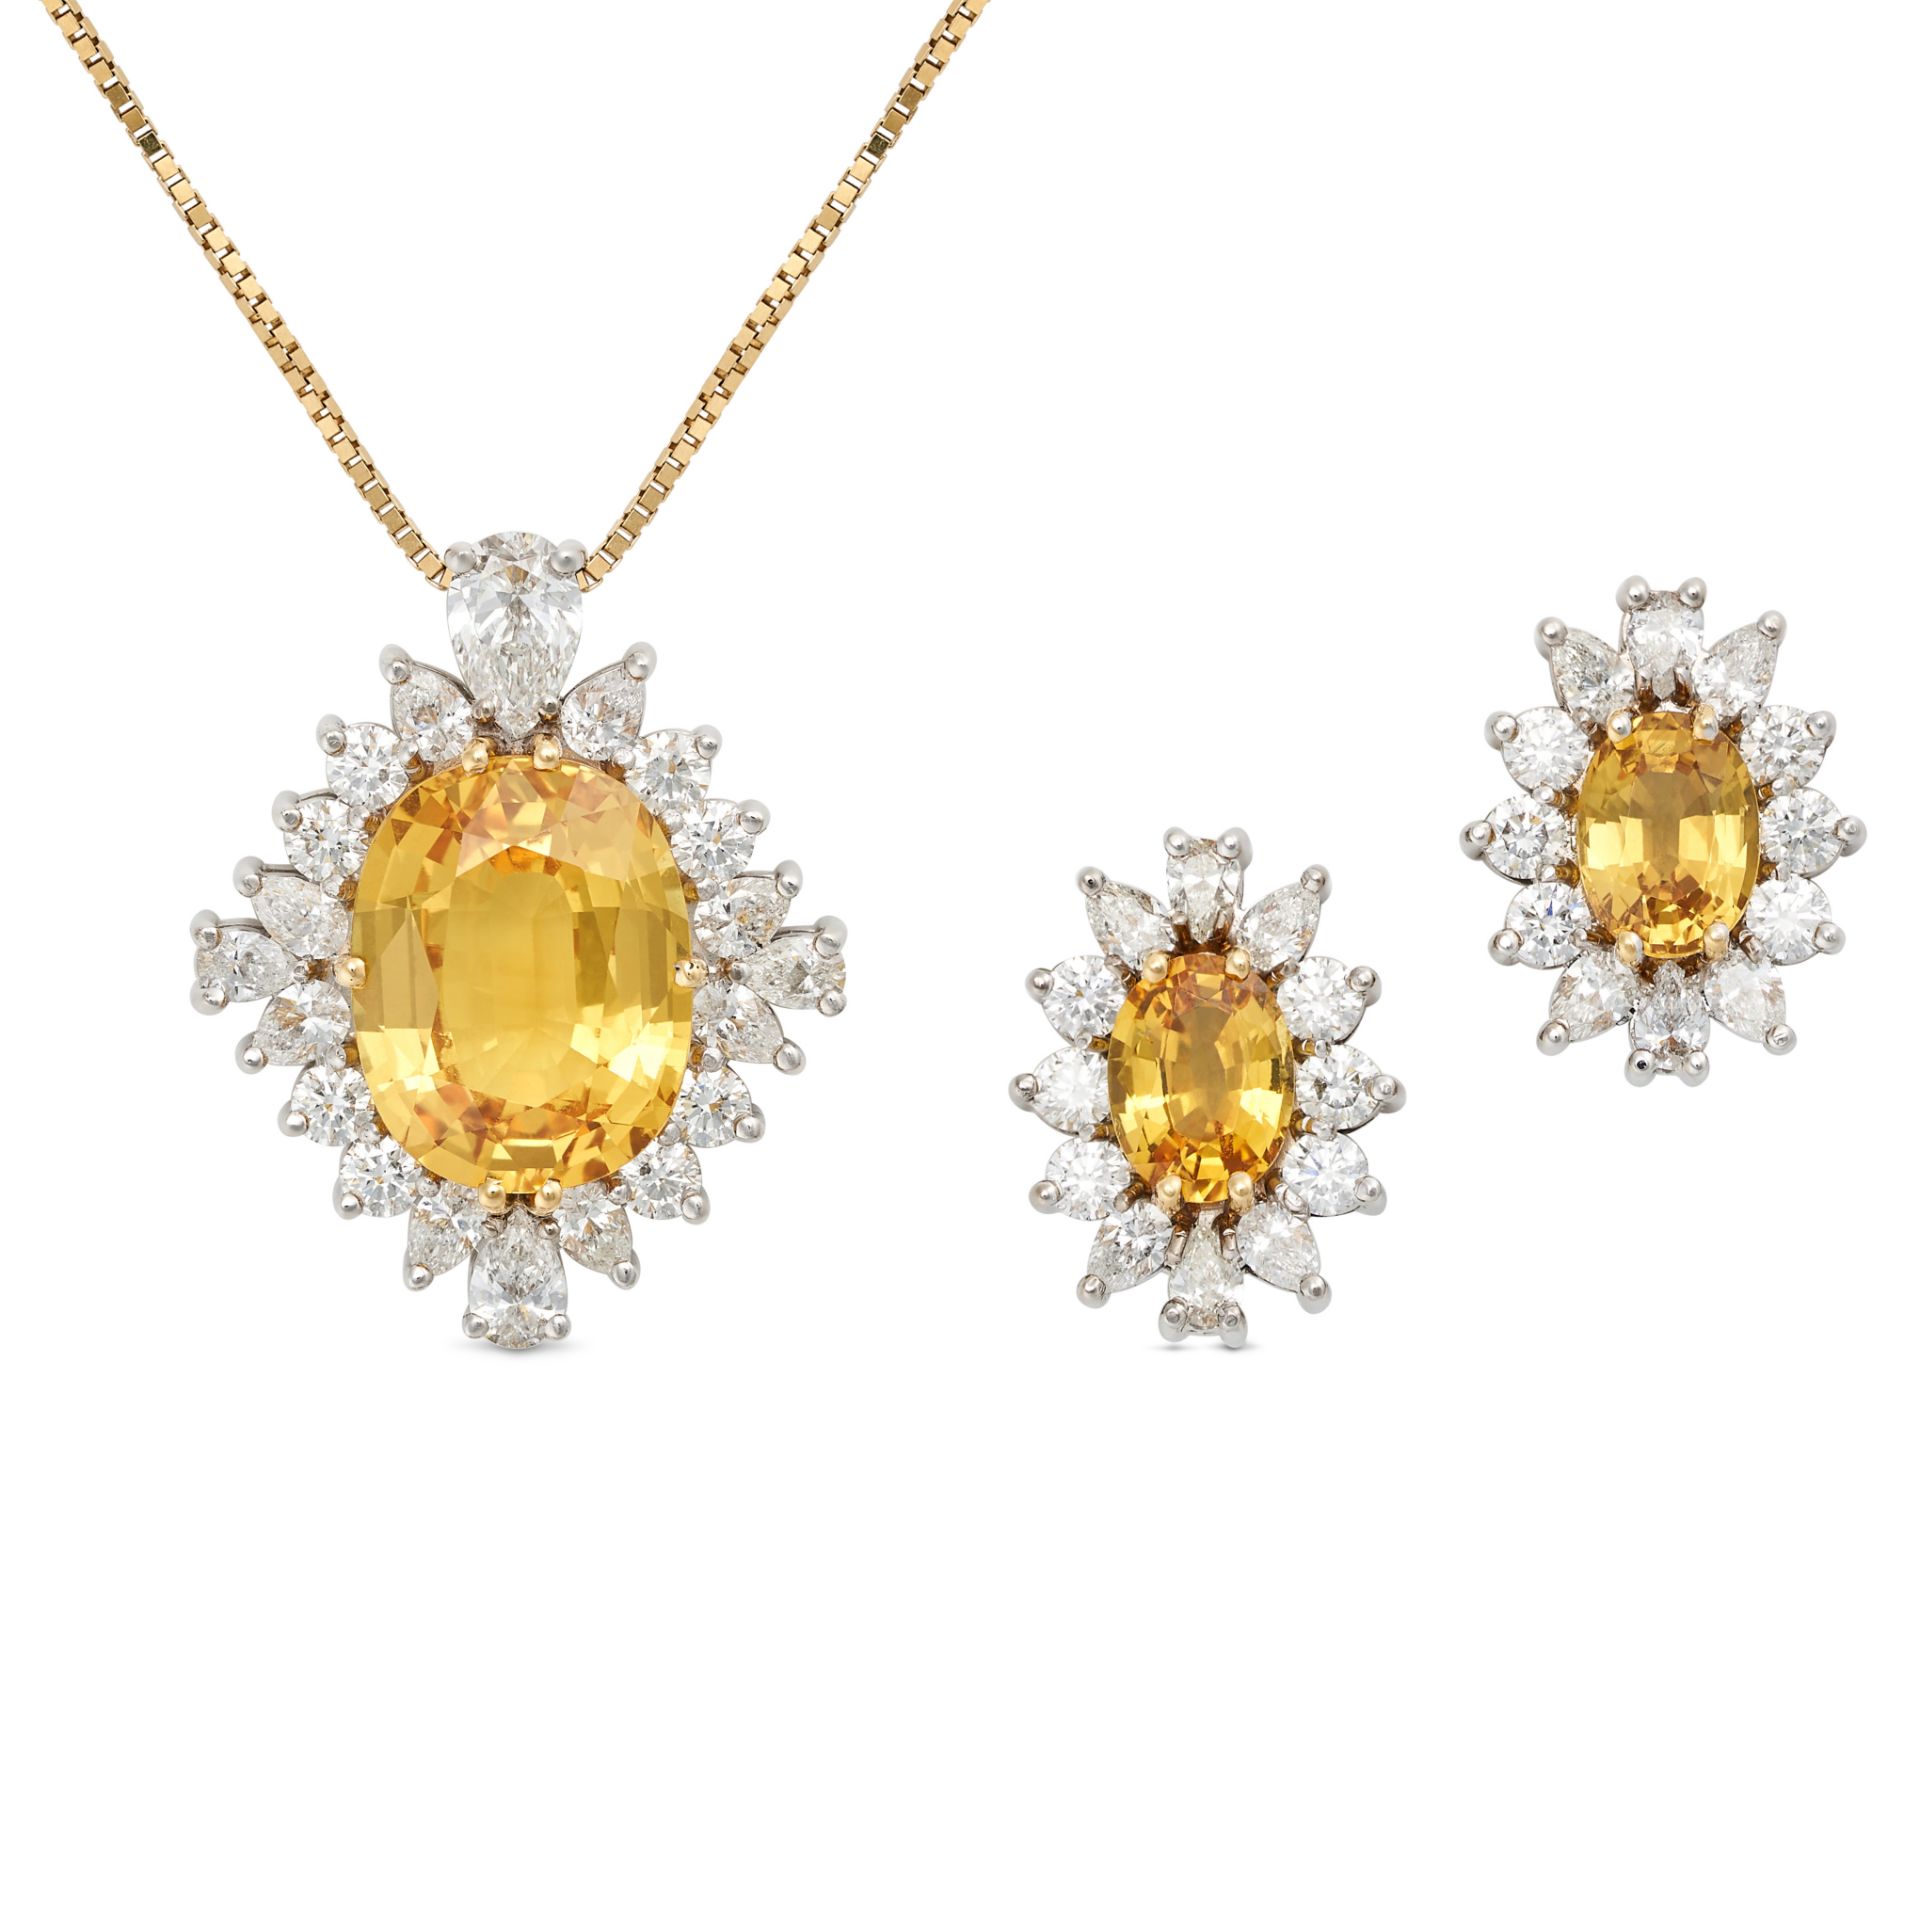 A YELLOW SAPPHIRE AND DIAMOND NECKLACE AND EARRINGS SUITE in 18ct white gold, the earrings set wi...